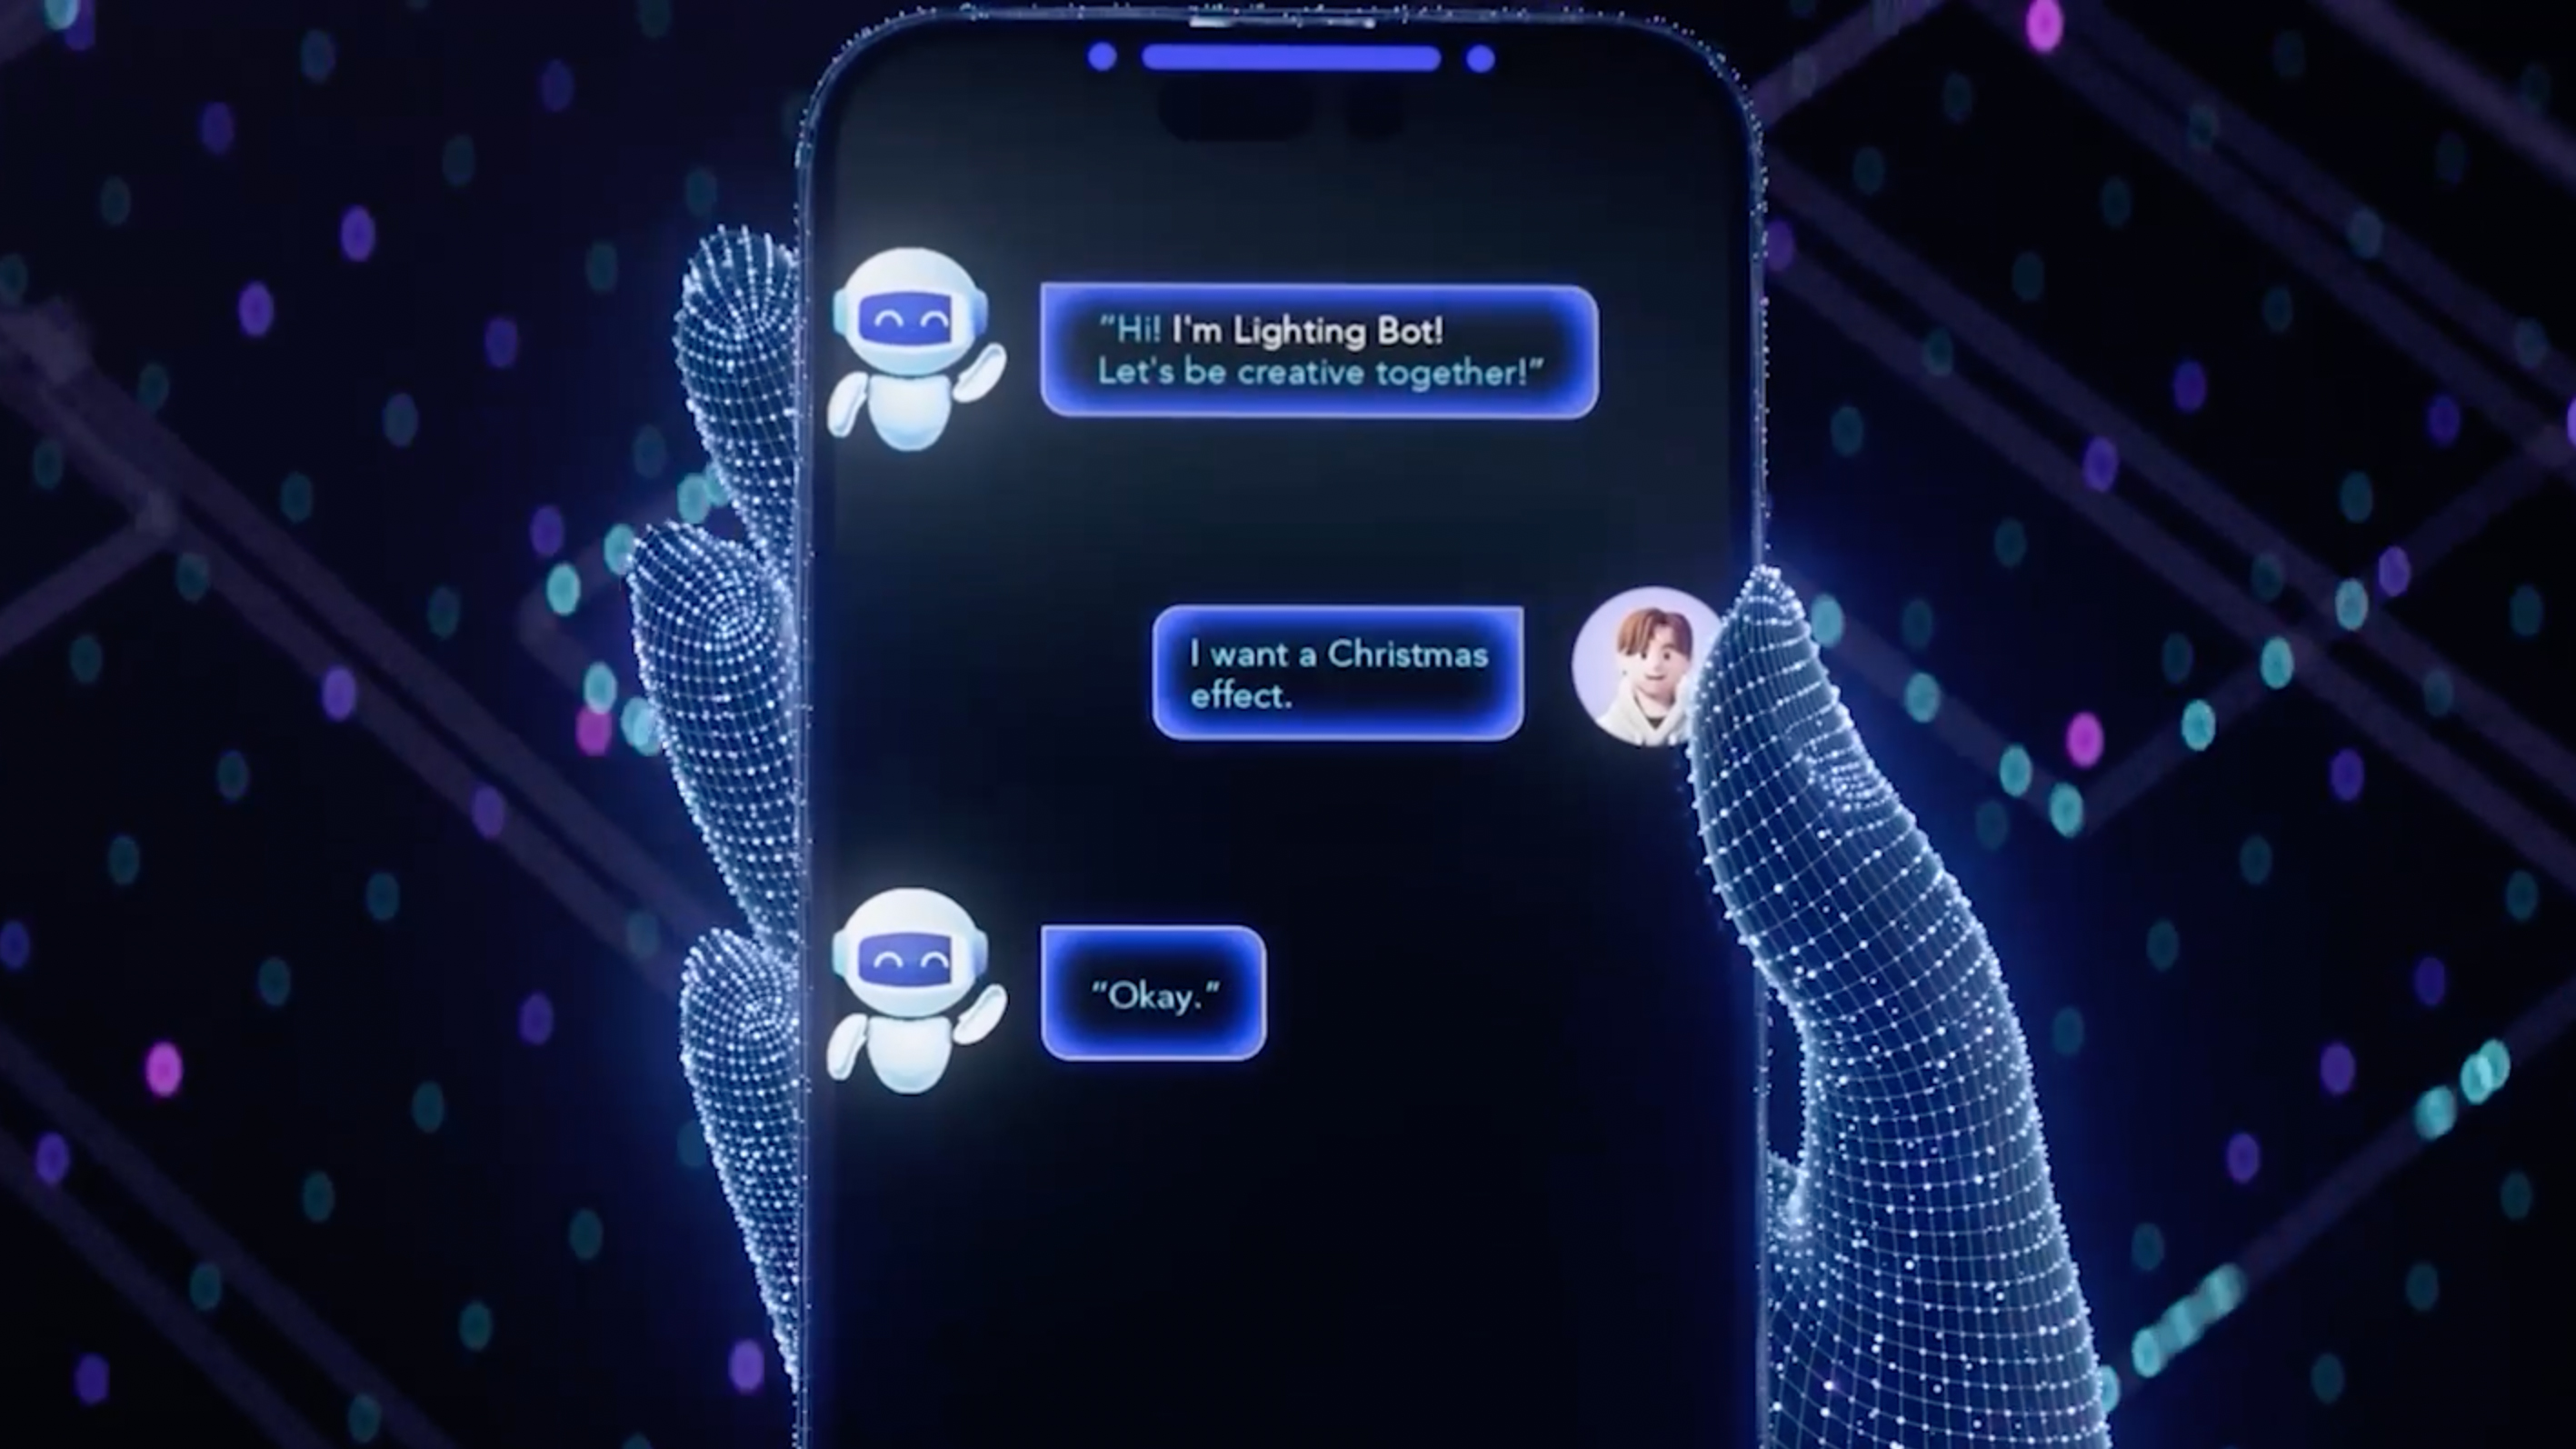 A mock-up of the Govee AI Lighting chatbot on a phone